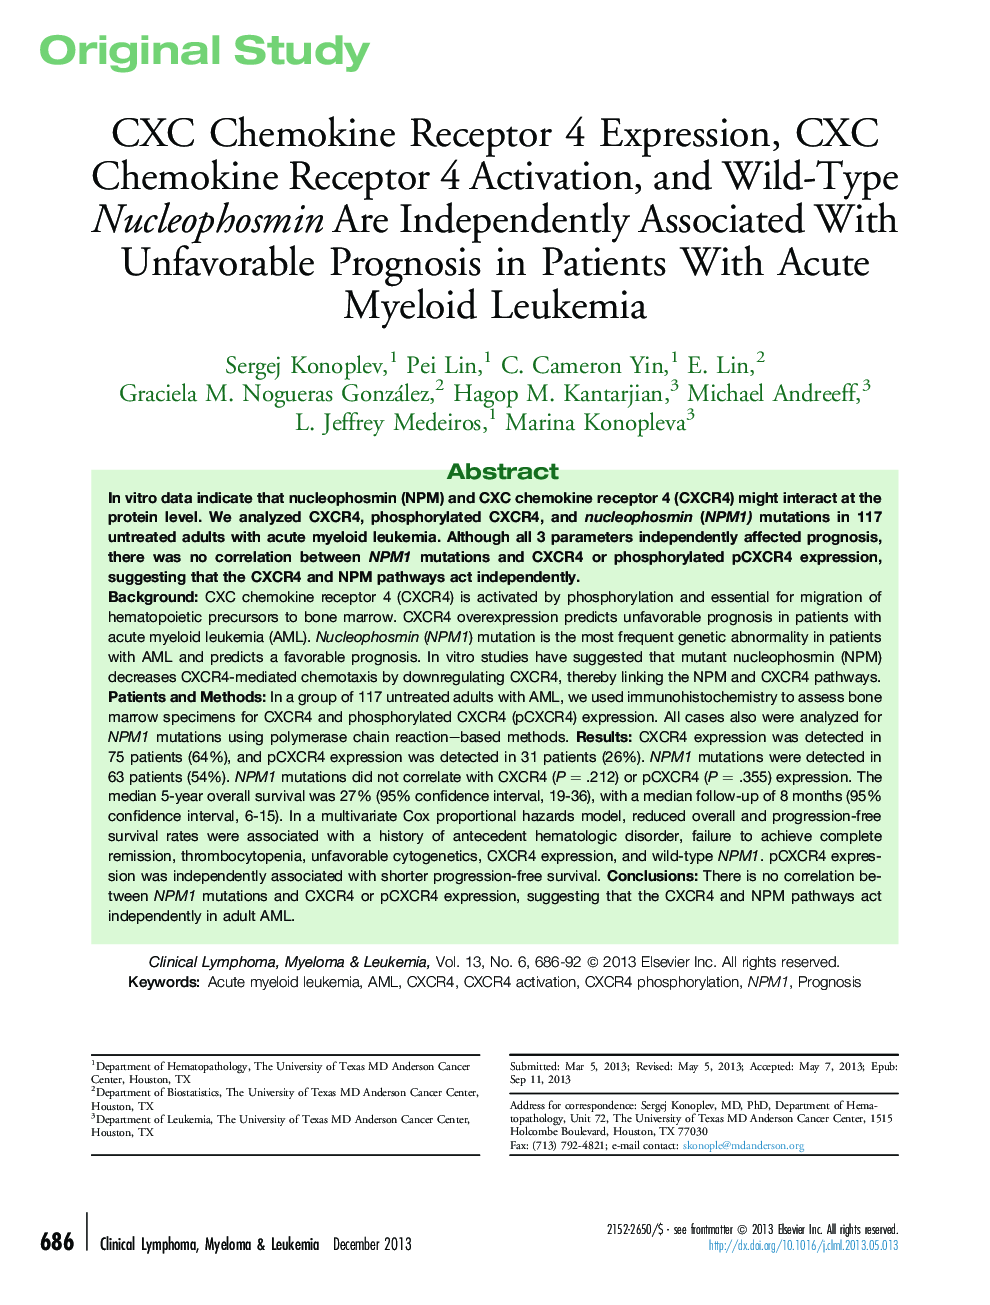 CXC Chemokine Receptor 4 Expression, CXC Chemokine Receptor 4 Activation, and Wild-Type Nucleophosmin Are Independently Associated With Unfavorable Prognosis in Patients With Acute Myeloid Leukemia